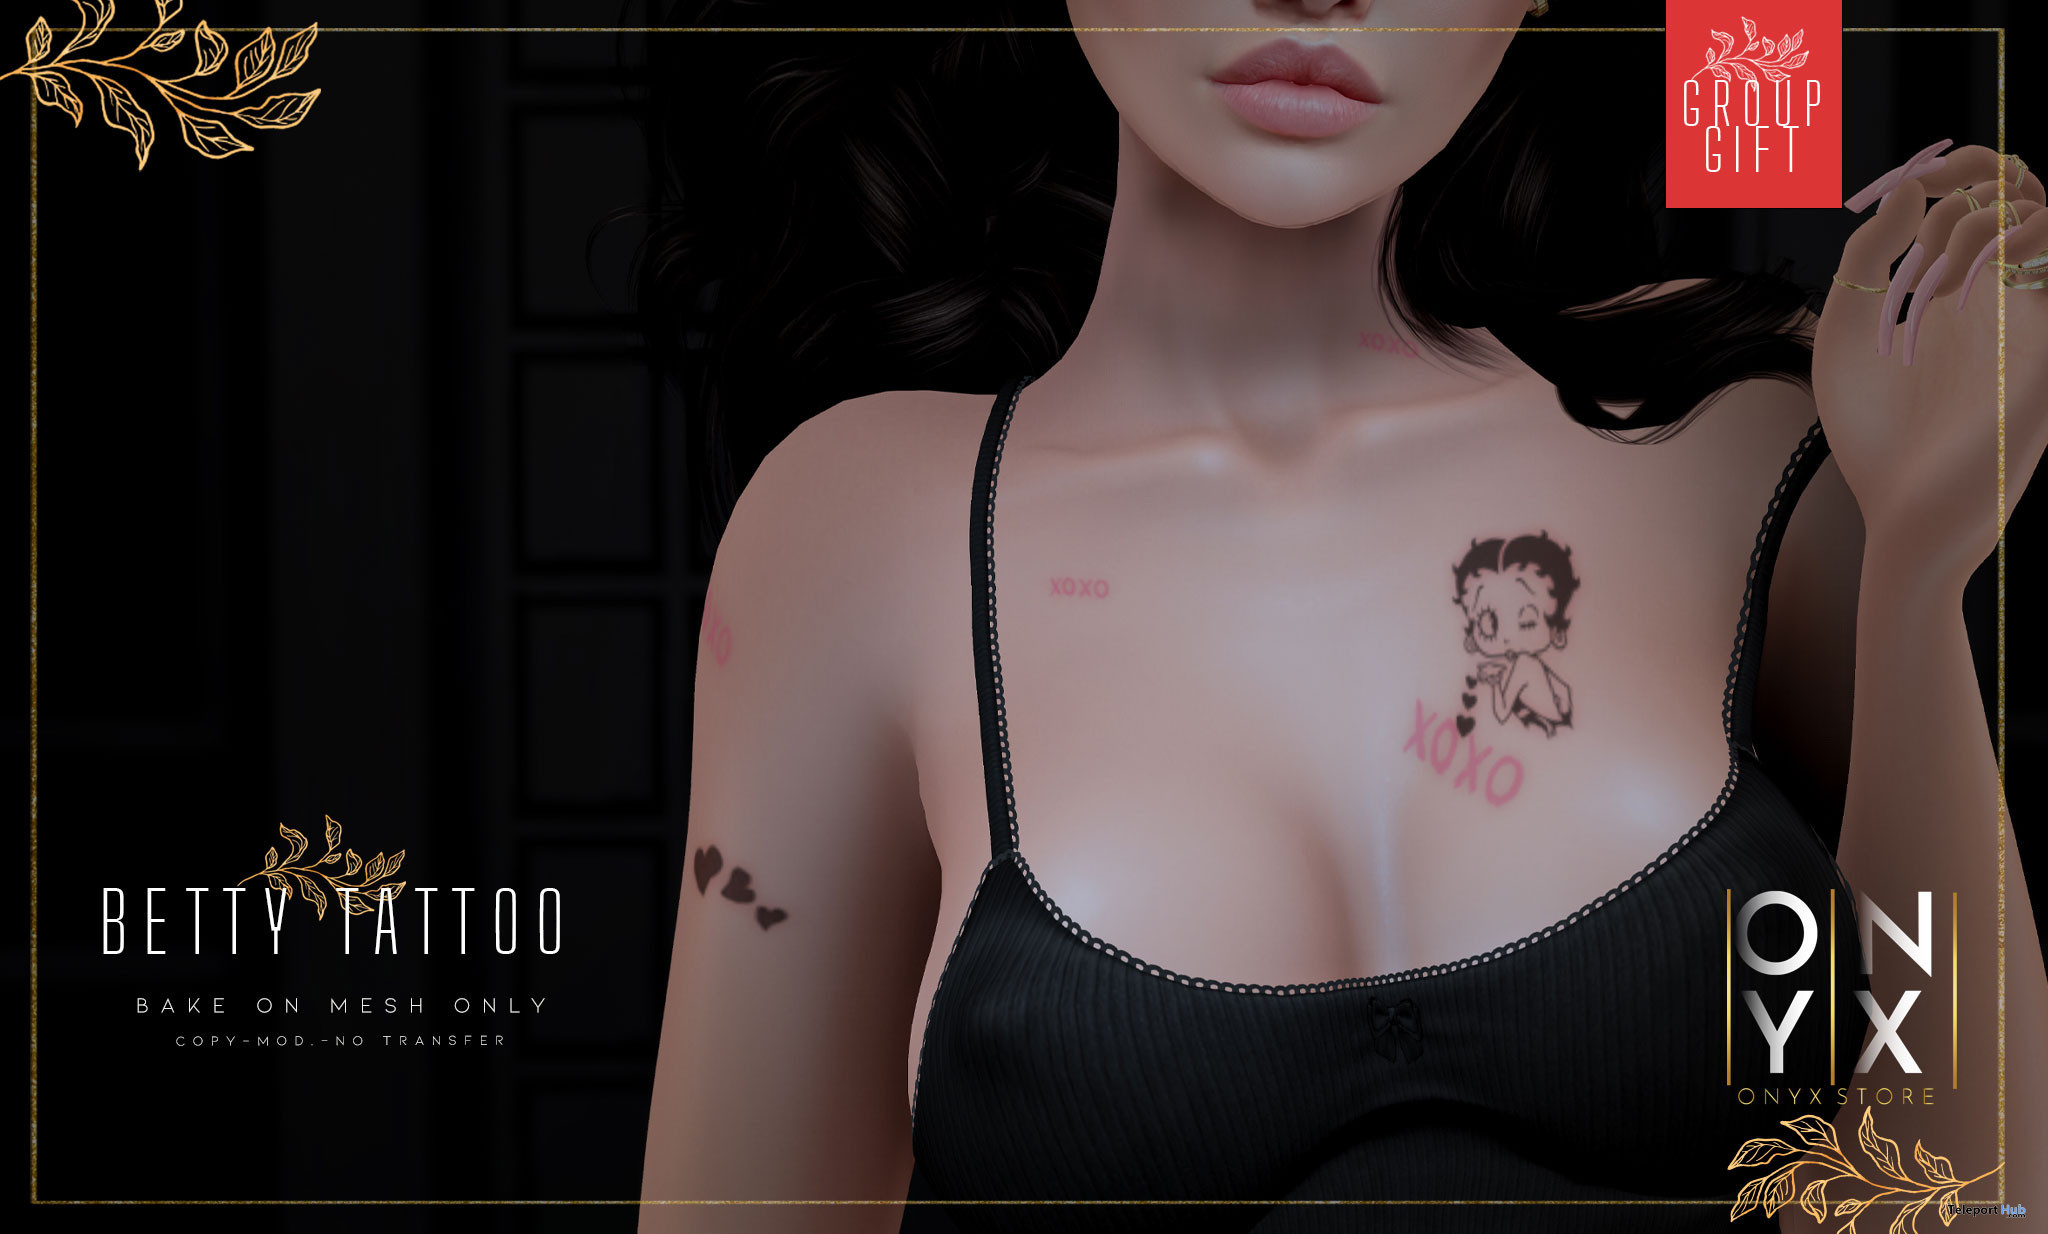 Betty Chest BOM Tattoo April 2022 Group Gift by [Onyx] Store - Teleport Hub - teleporthub.com